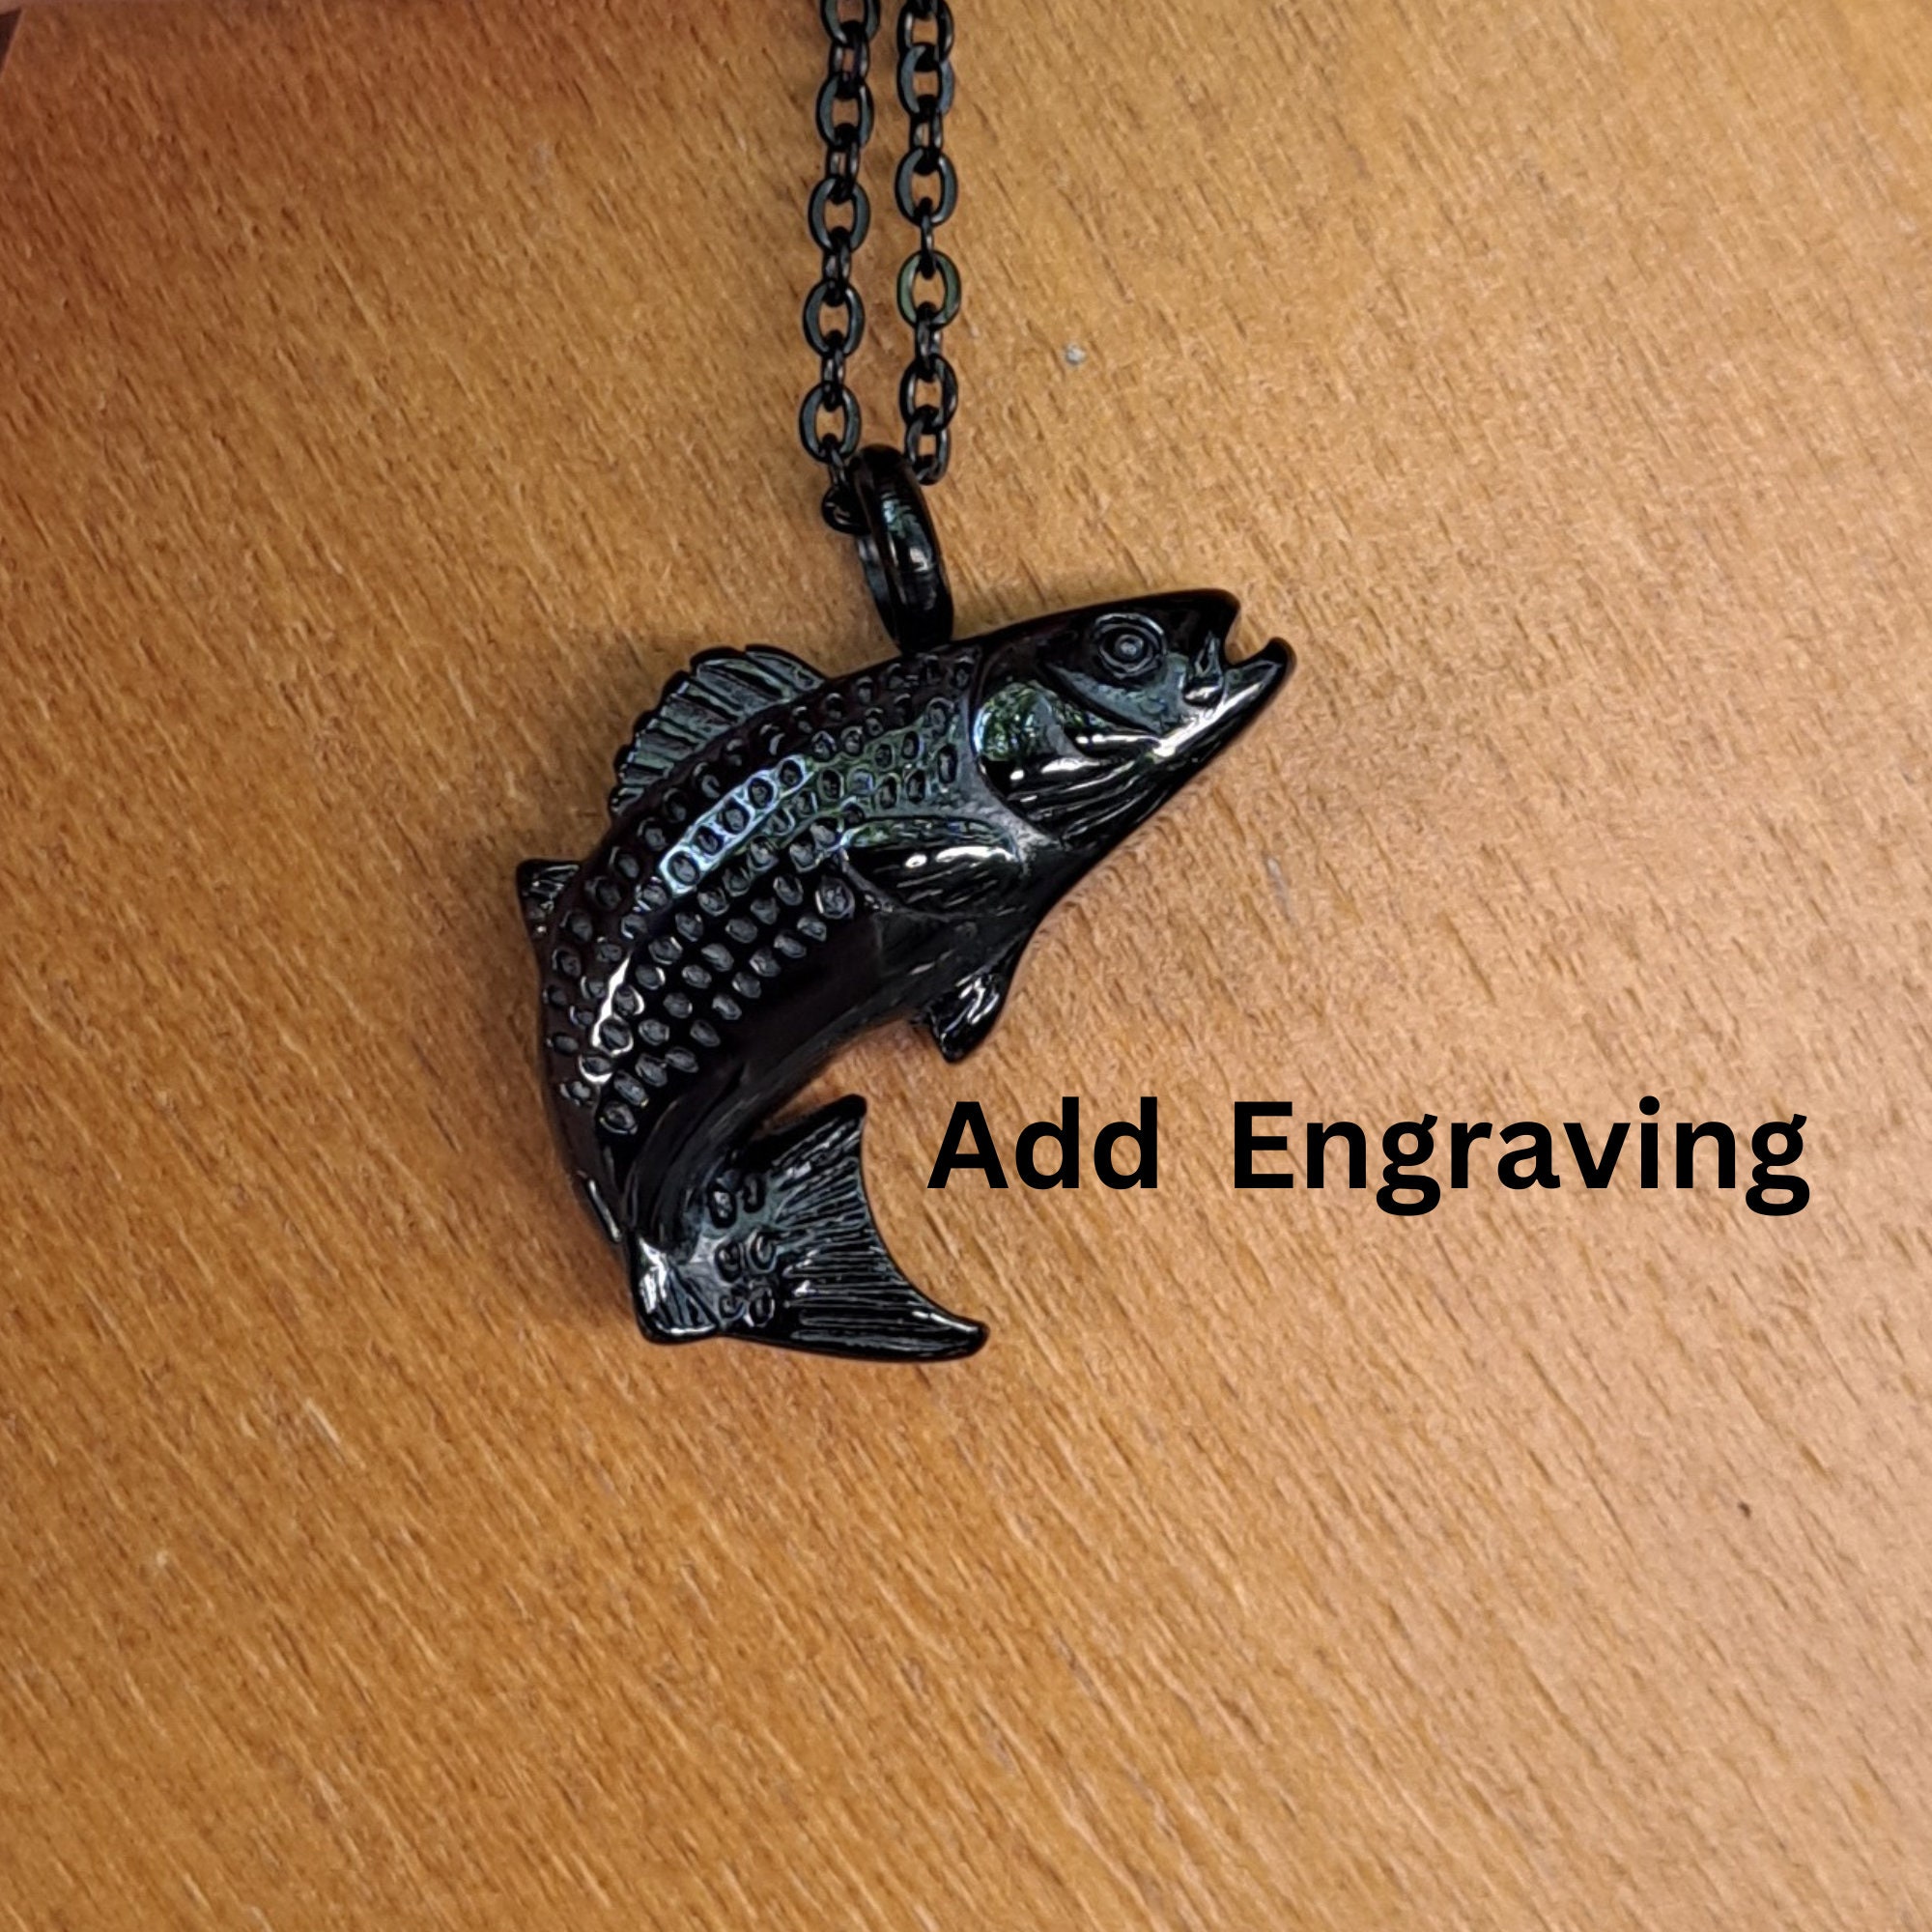 Fishing in Heaven, Memorial Urn Jewelry, Fish Urn Necklace, Cremation Jewelry, Fish Urn, Fishing with Dad, Fisherman Necklace, Ash Holder